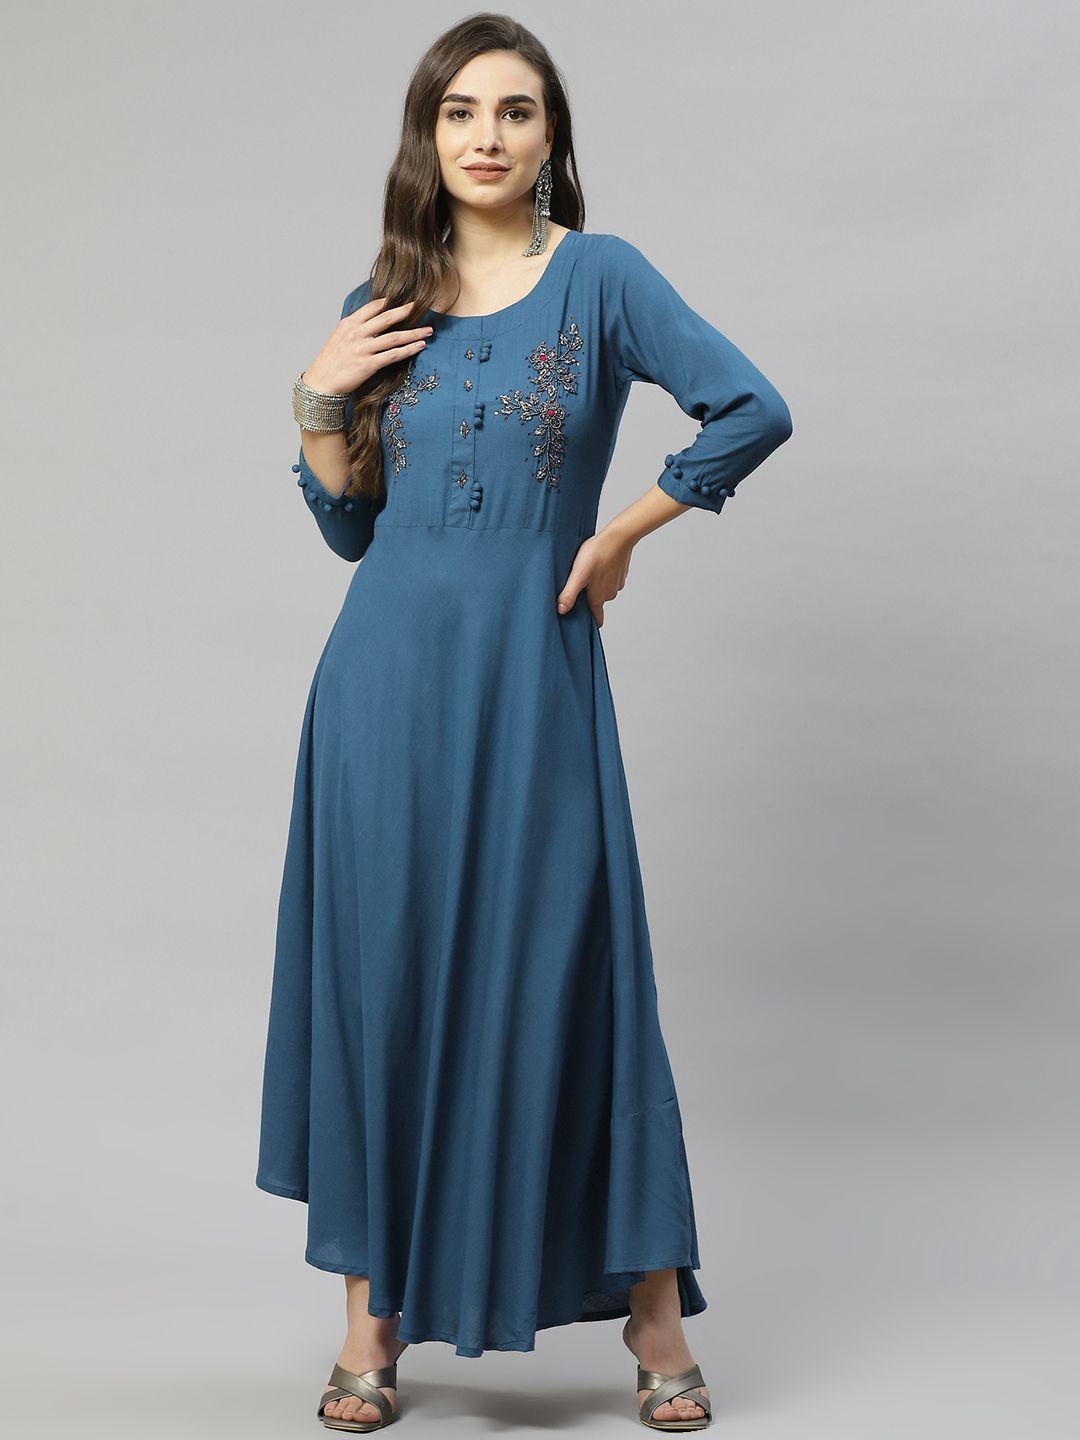 highlight-fashion-export-teal-embellished-a-line-maxi-dress